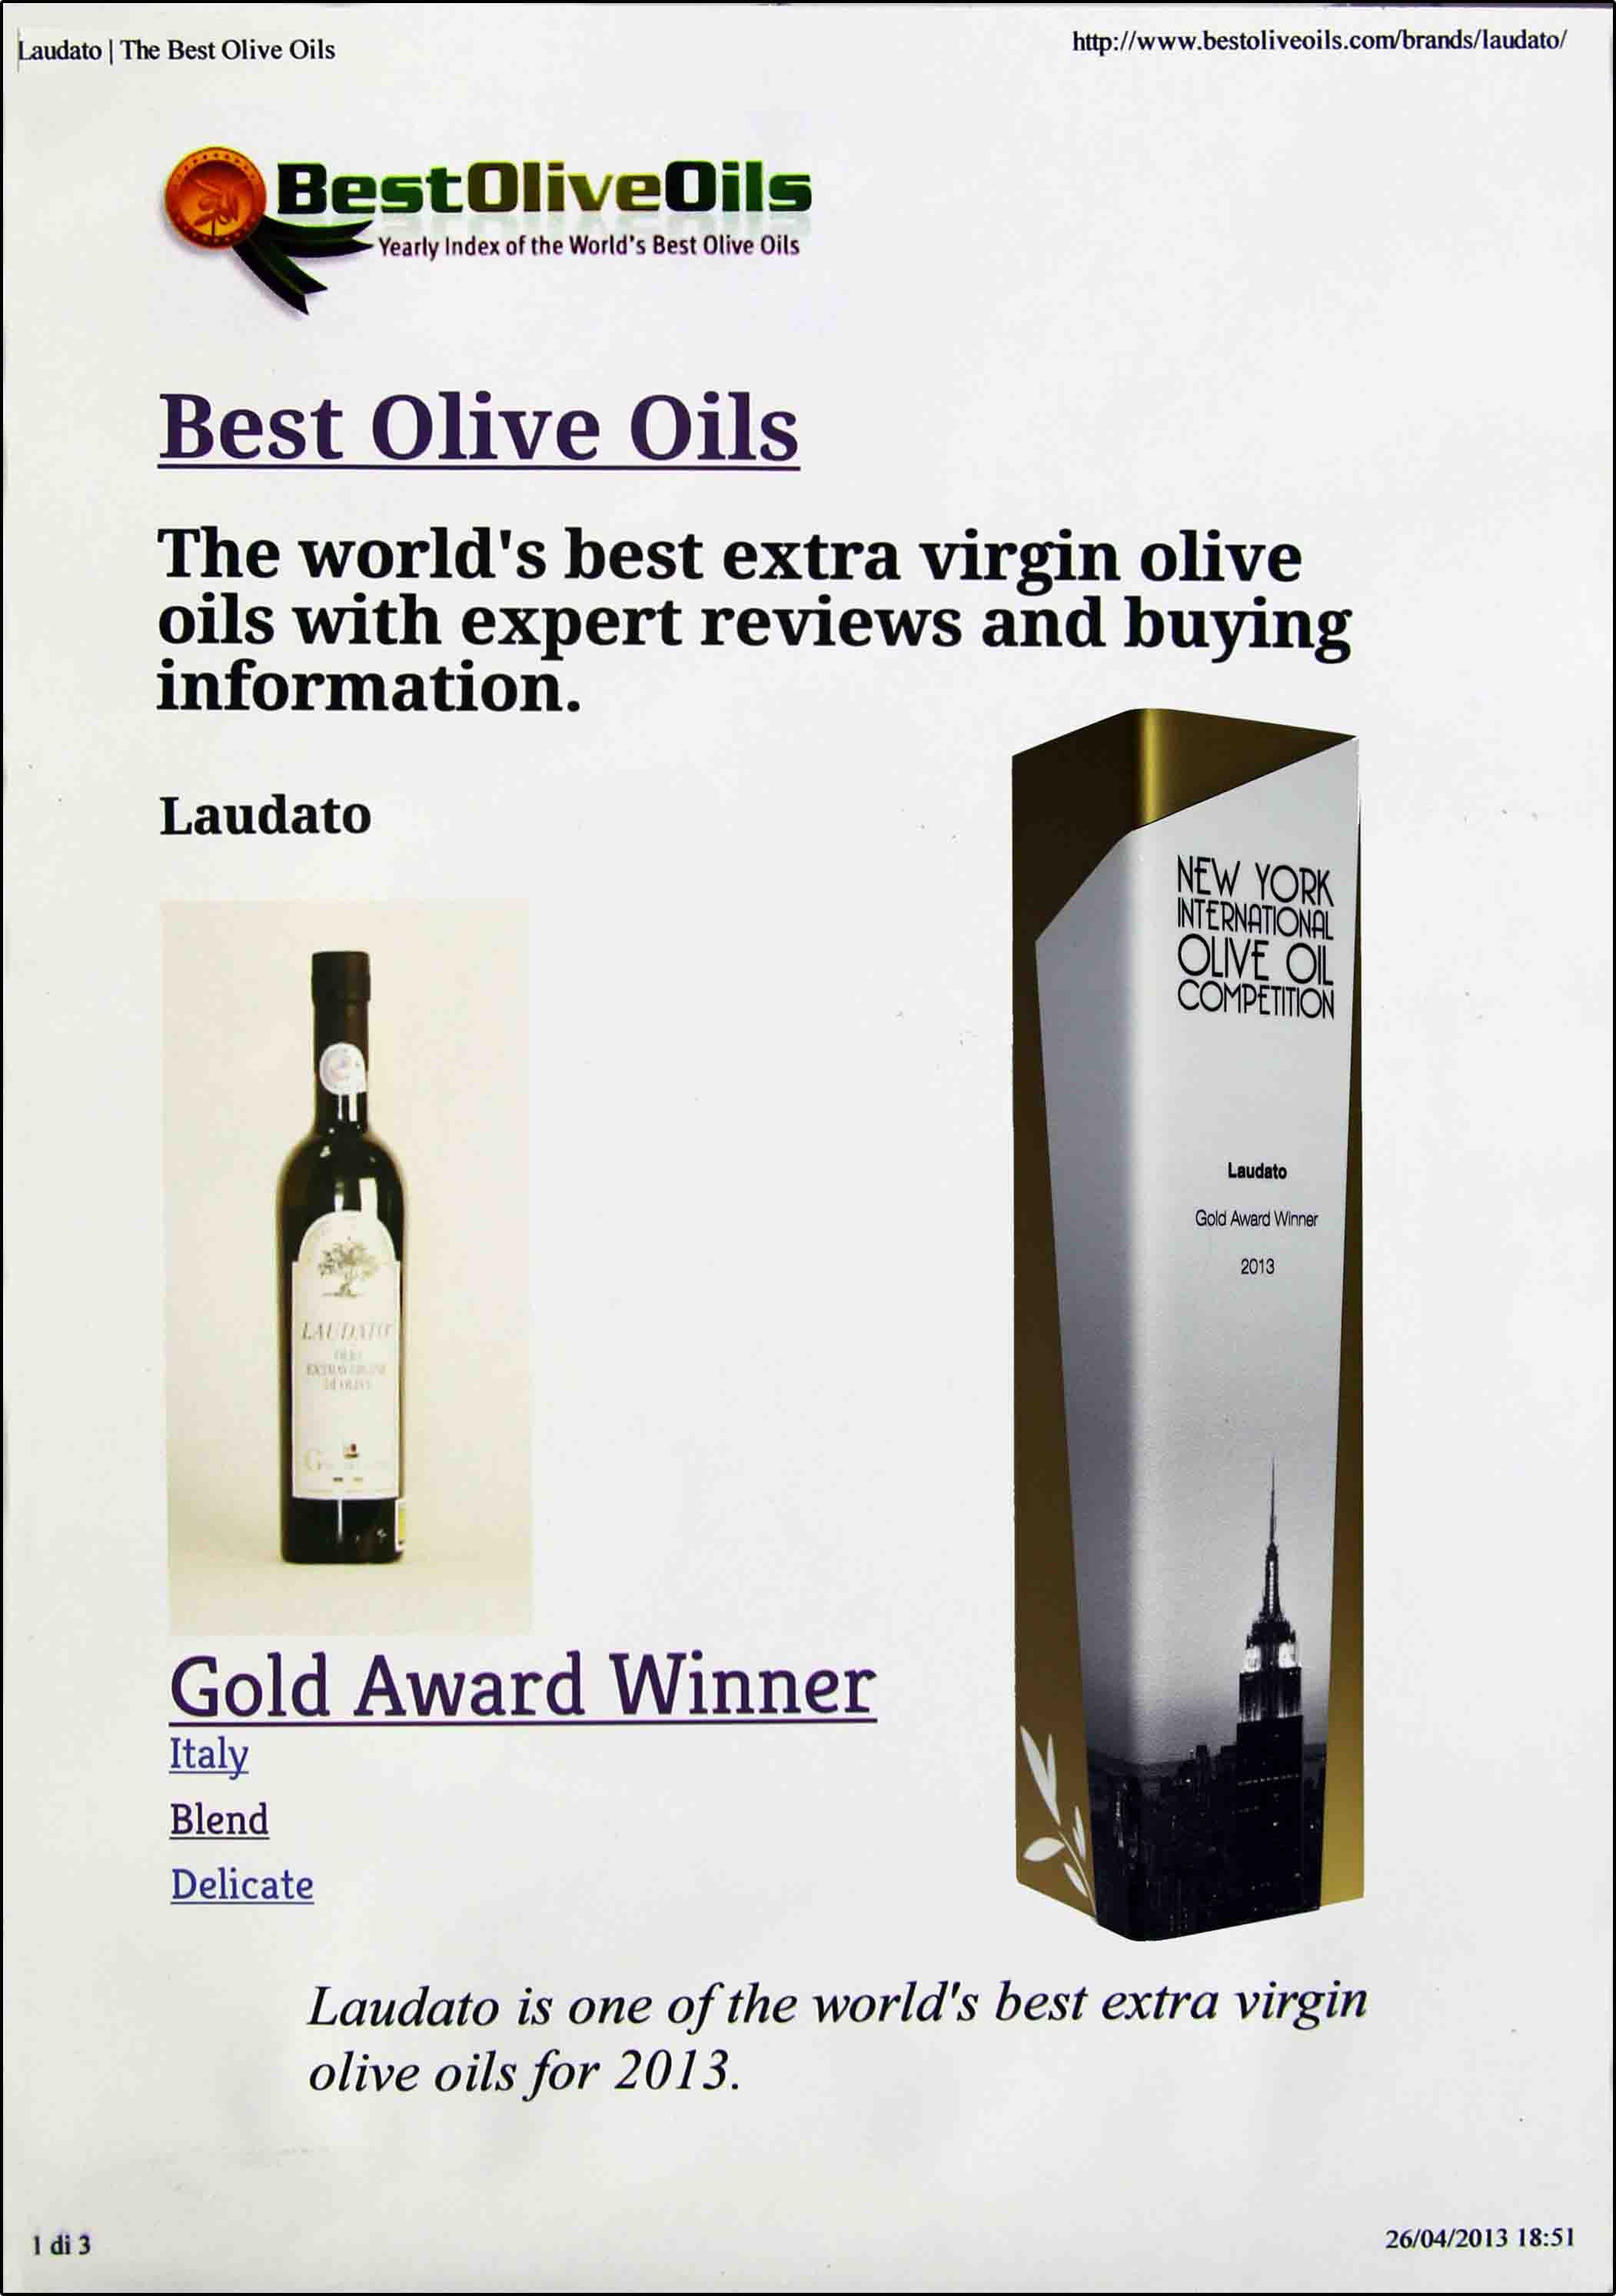 New York International Olive Oil Competition Laudato 2013